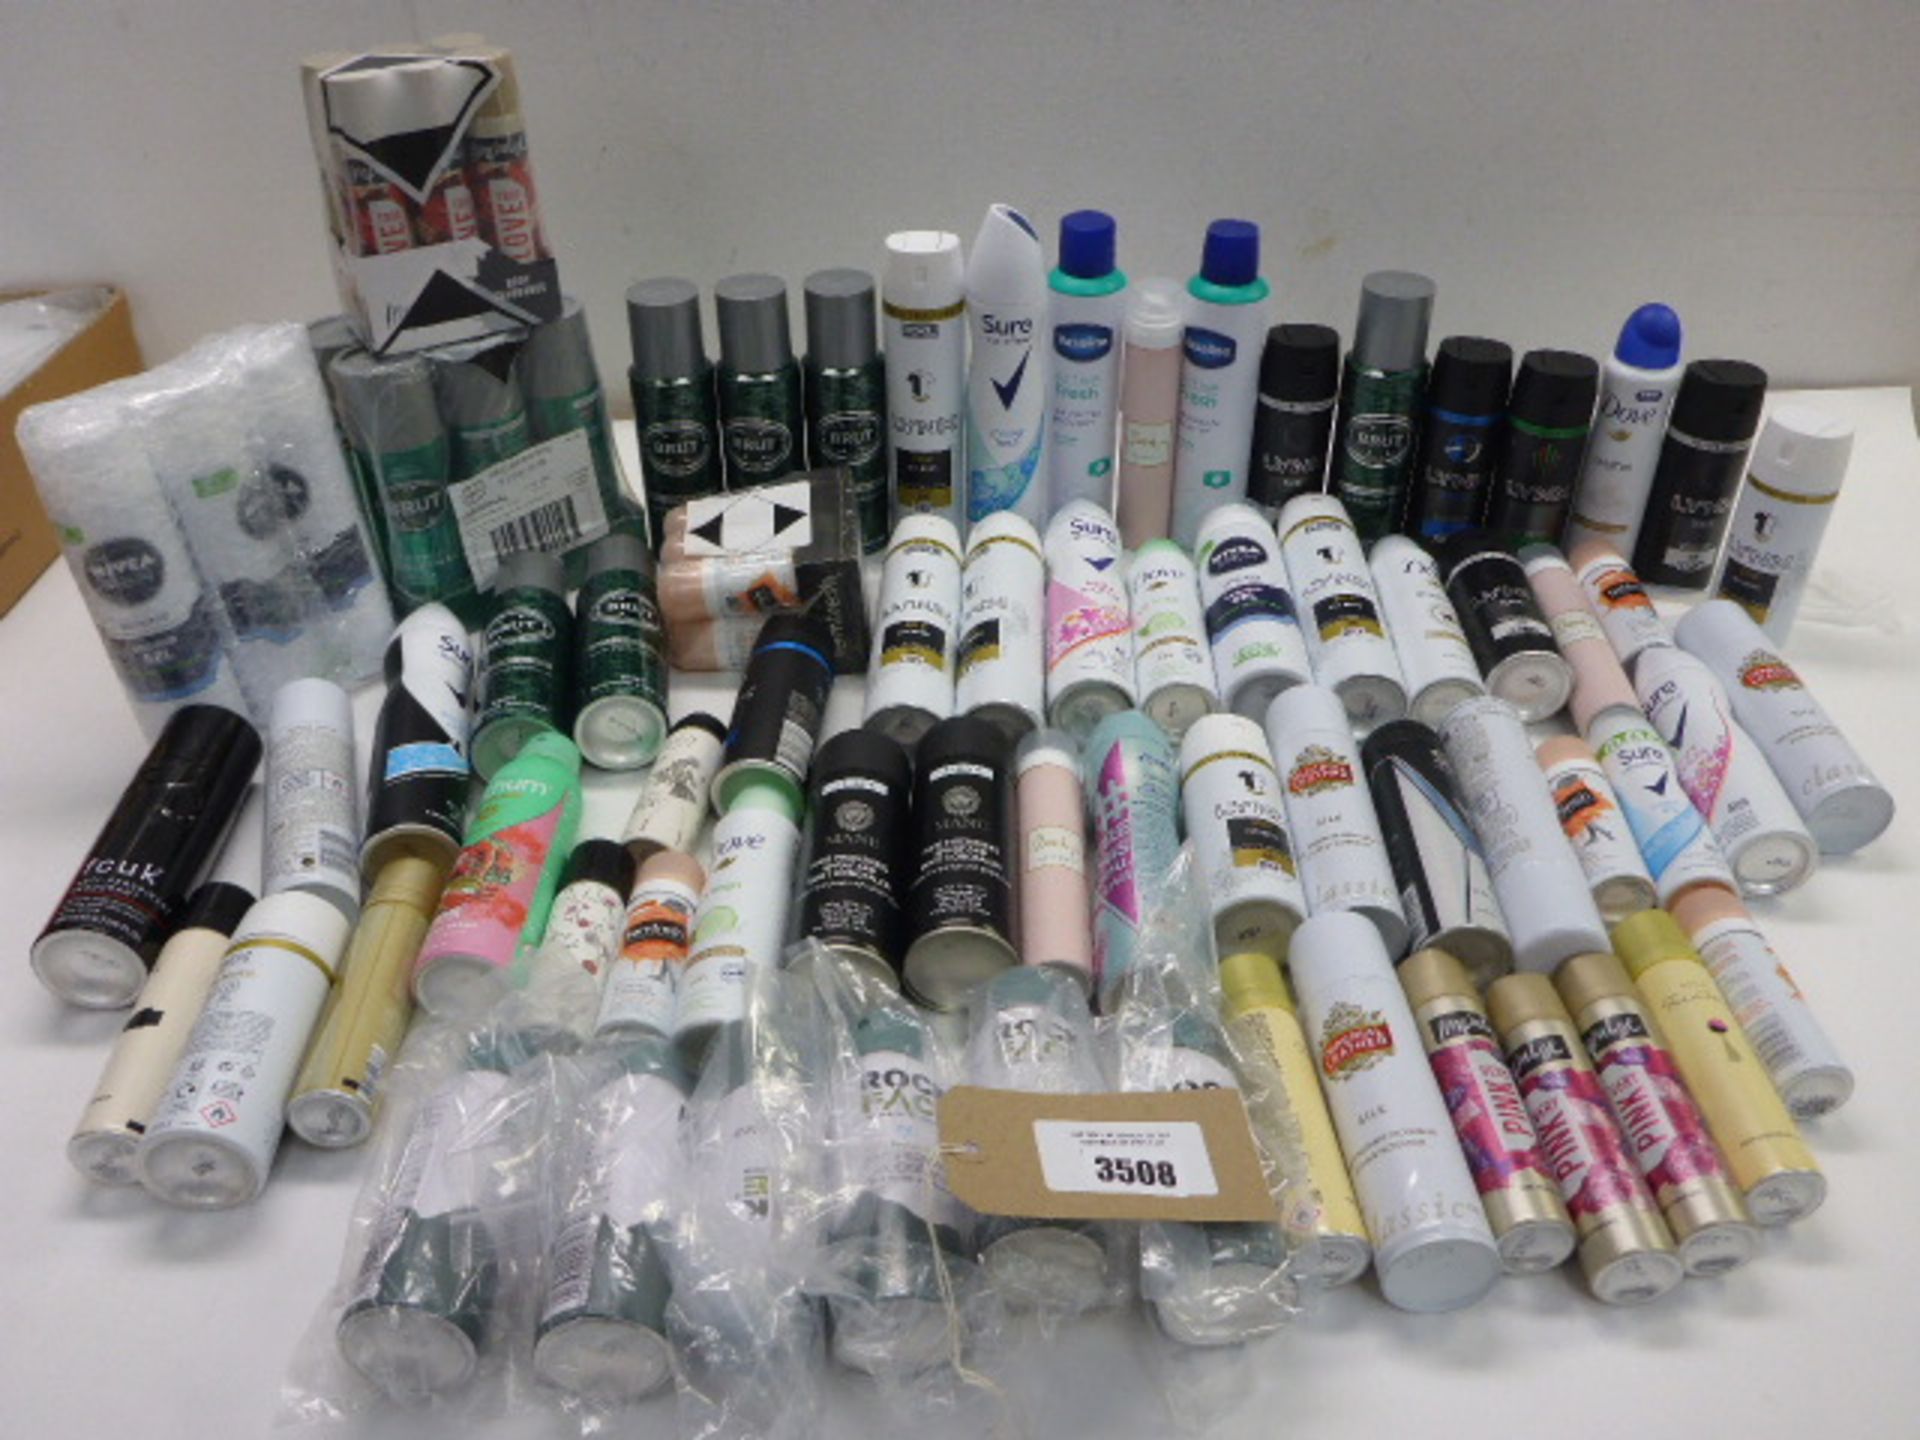 Large quantity of Lynx, Brut, Nivea, Sure and other deodorants, anti-perspirant and body sprays